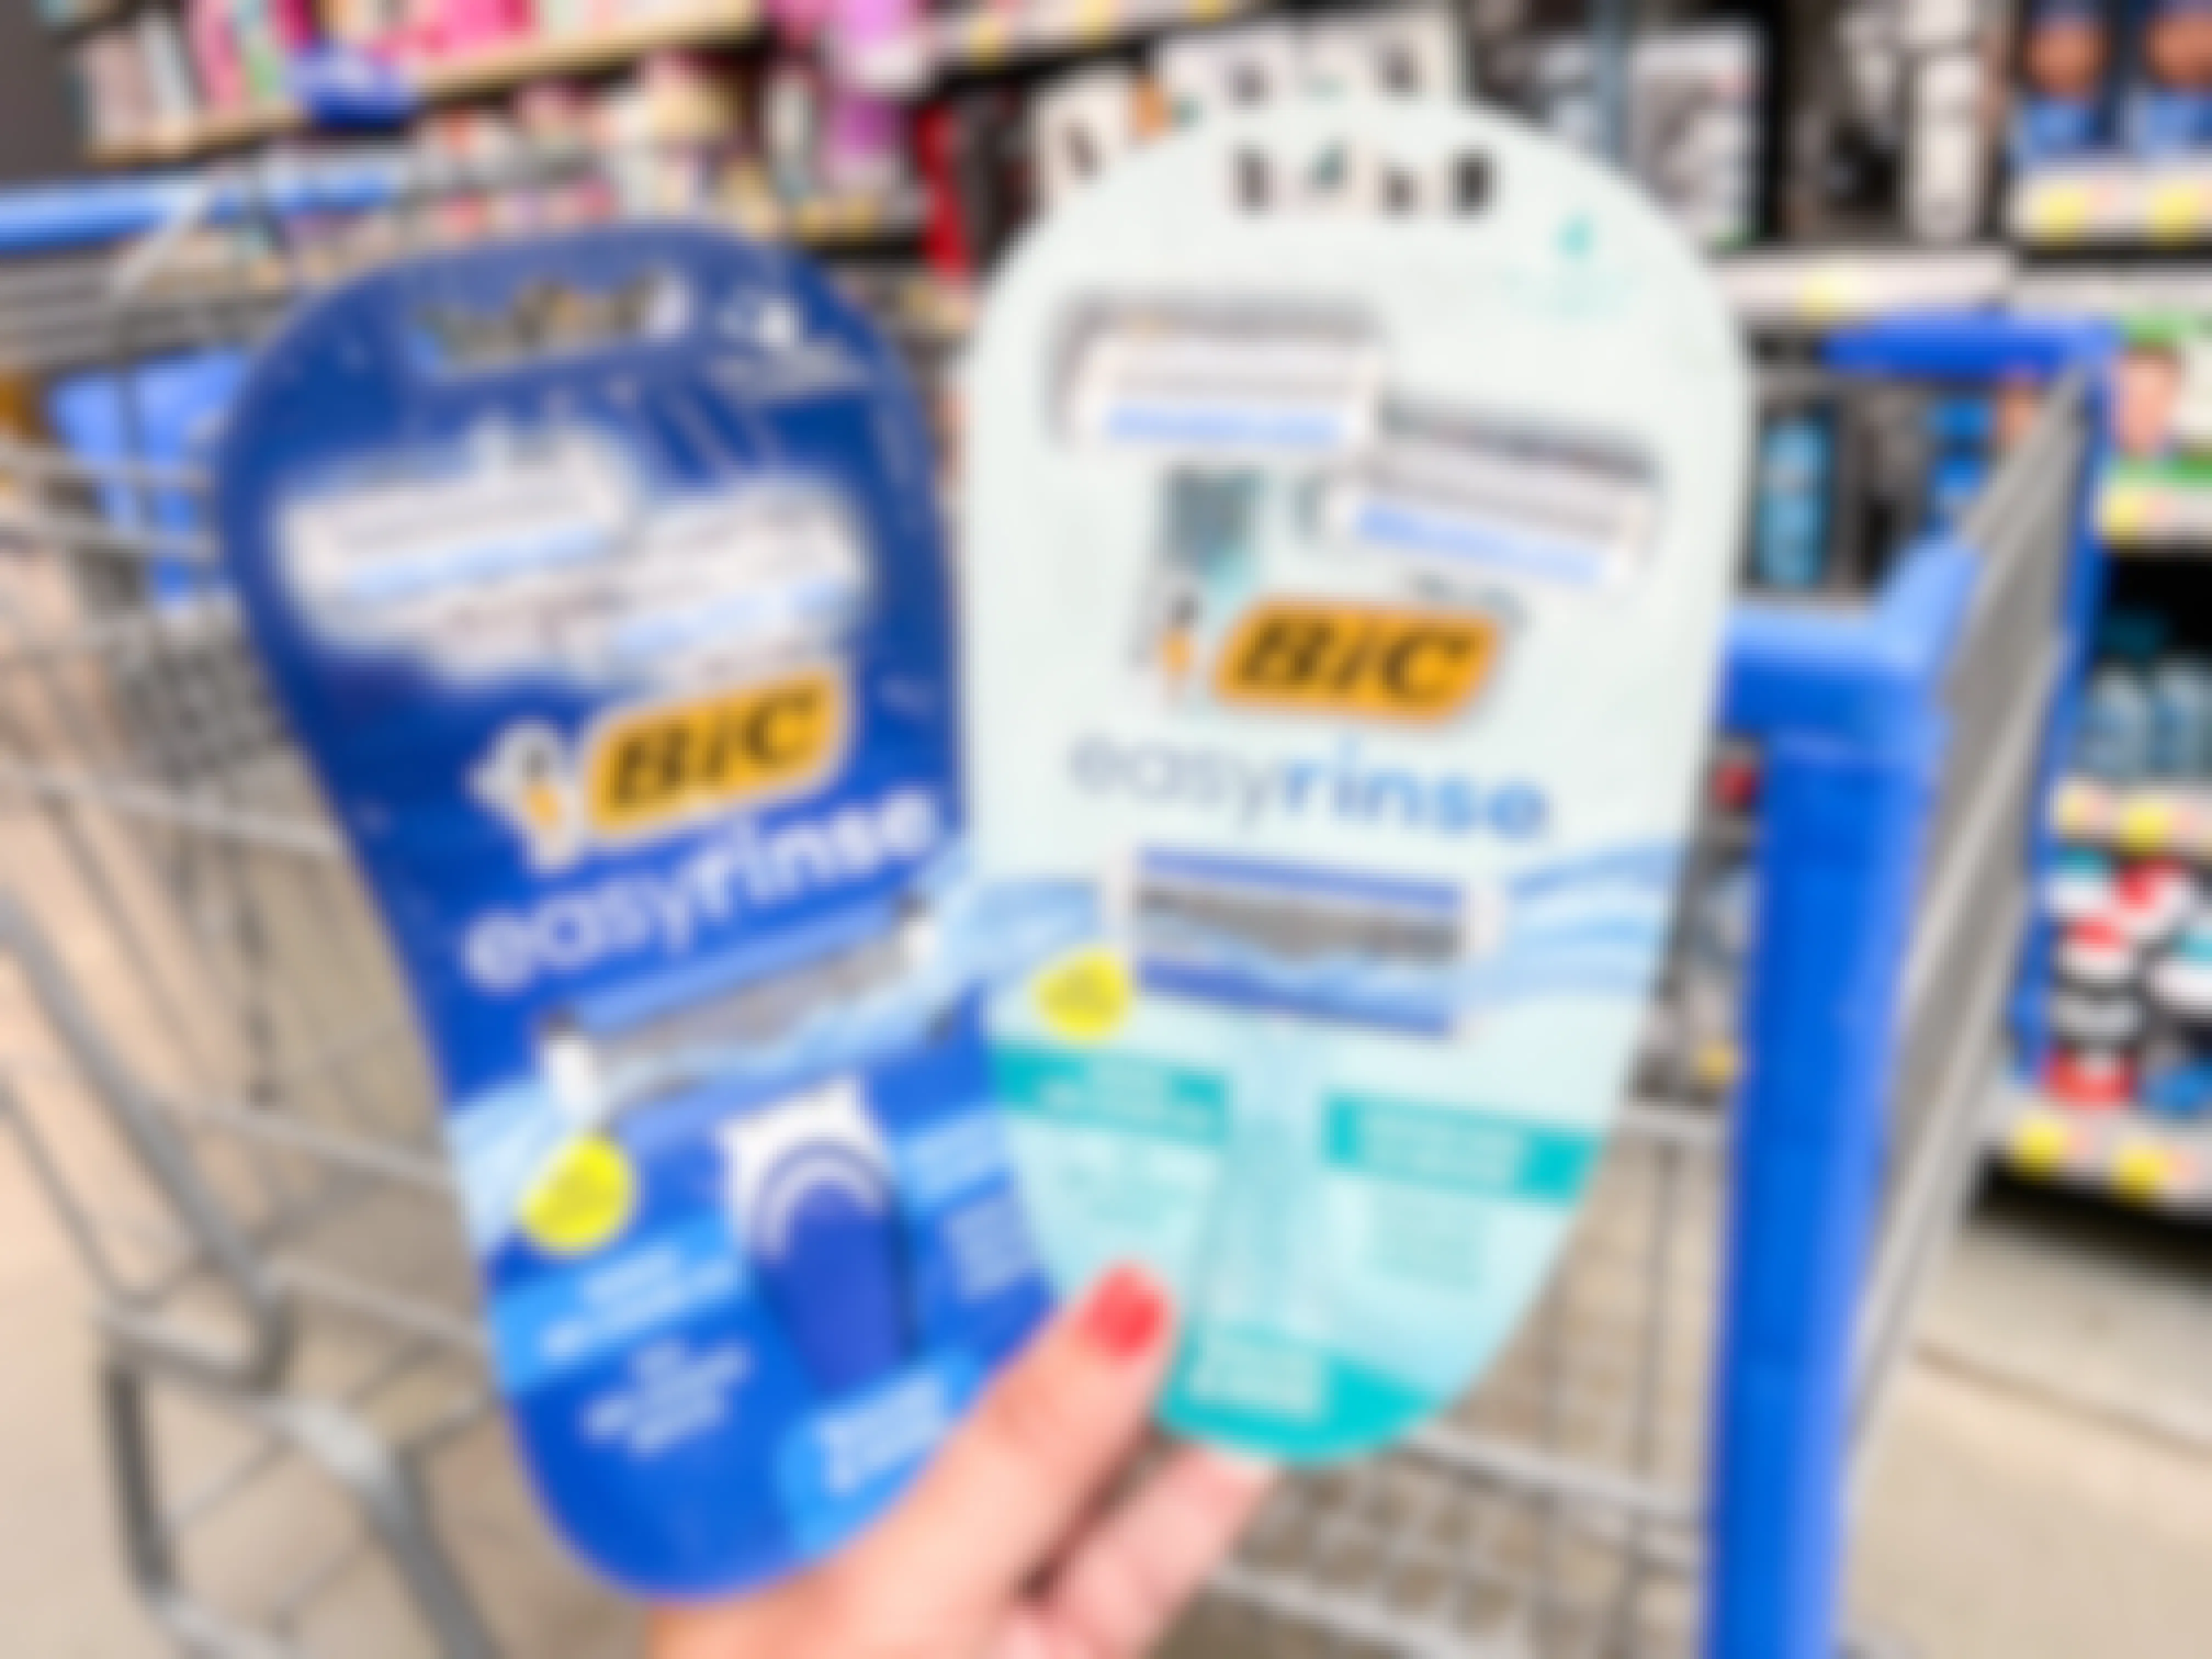 Get a 2-Pack of BIC Razors for $2 at Walmart